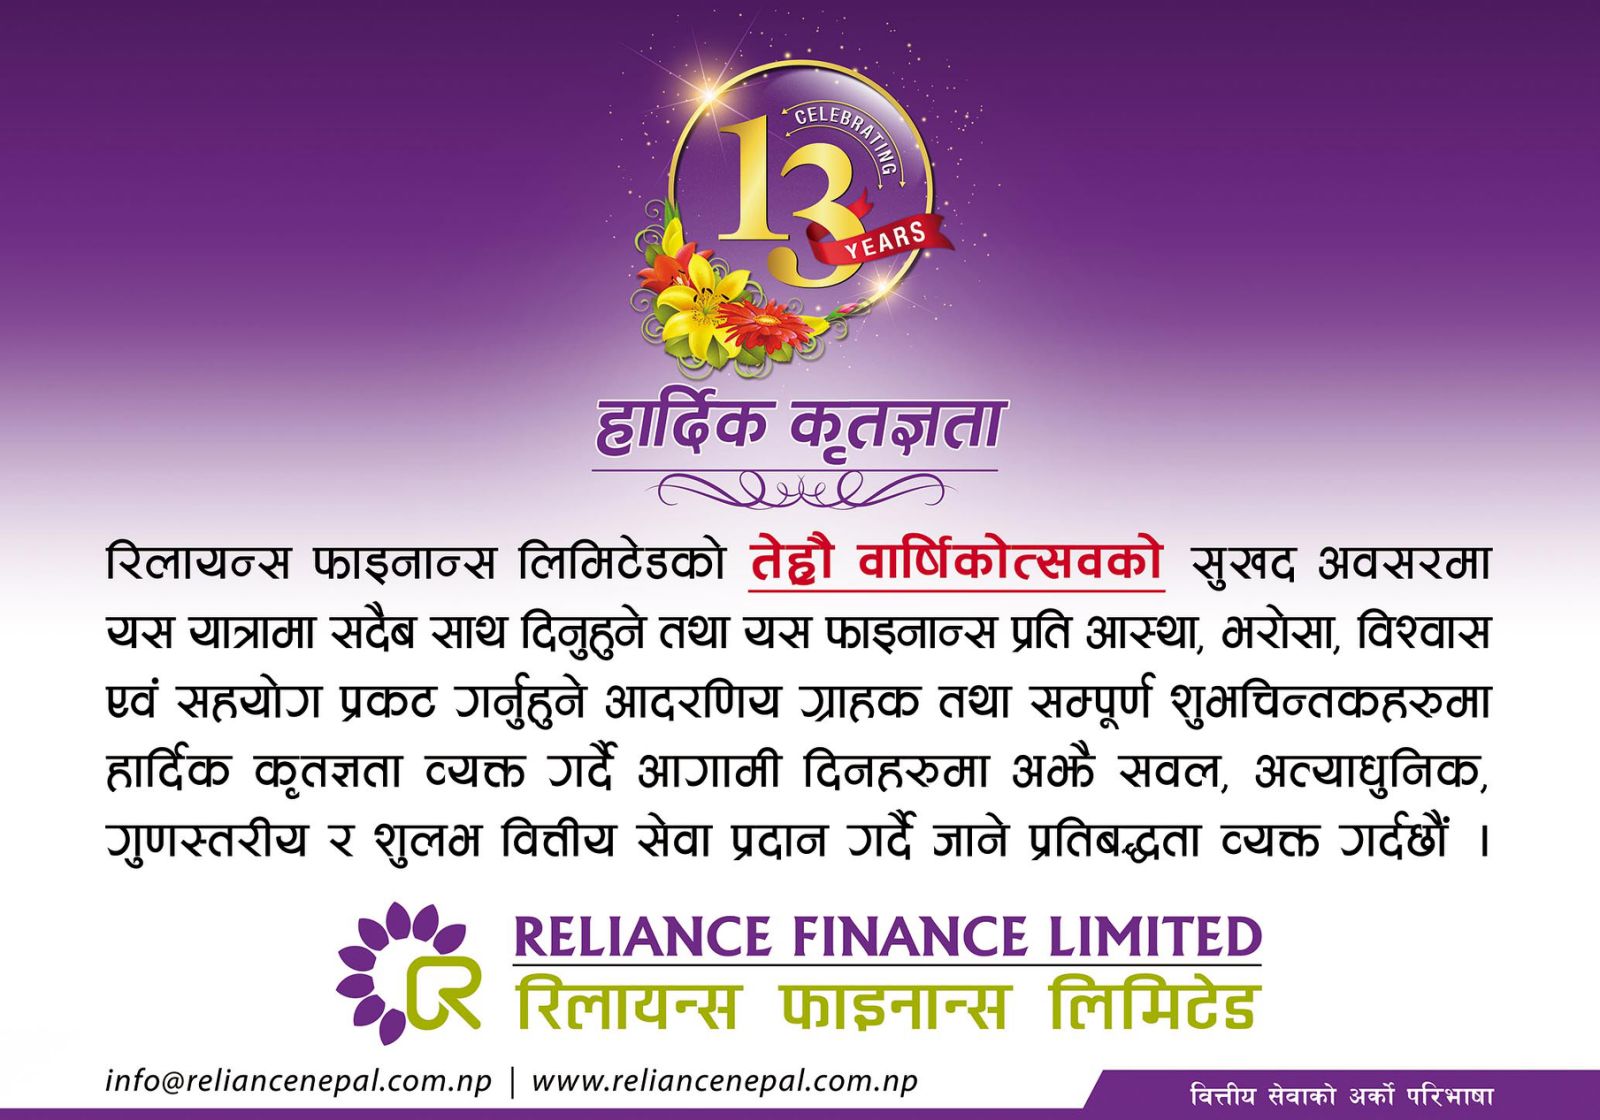 Reliance Finance Limited Celebrates its 13 Year Anniversary